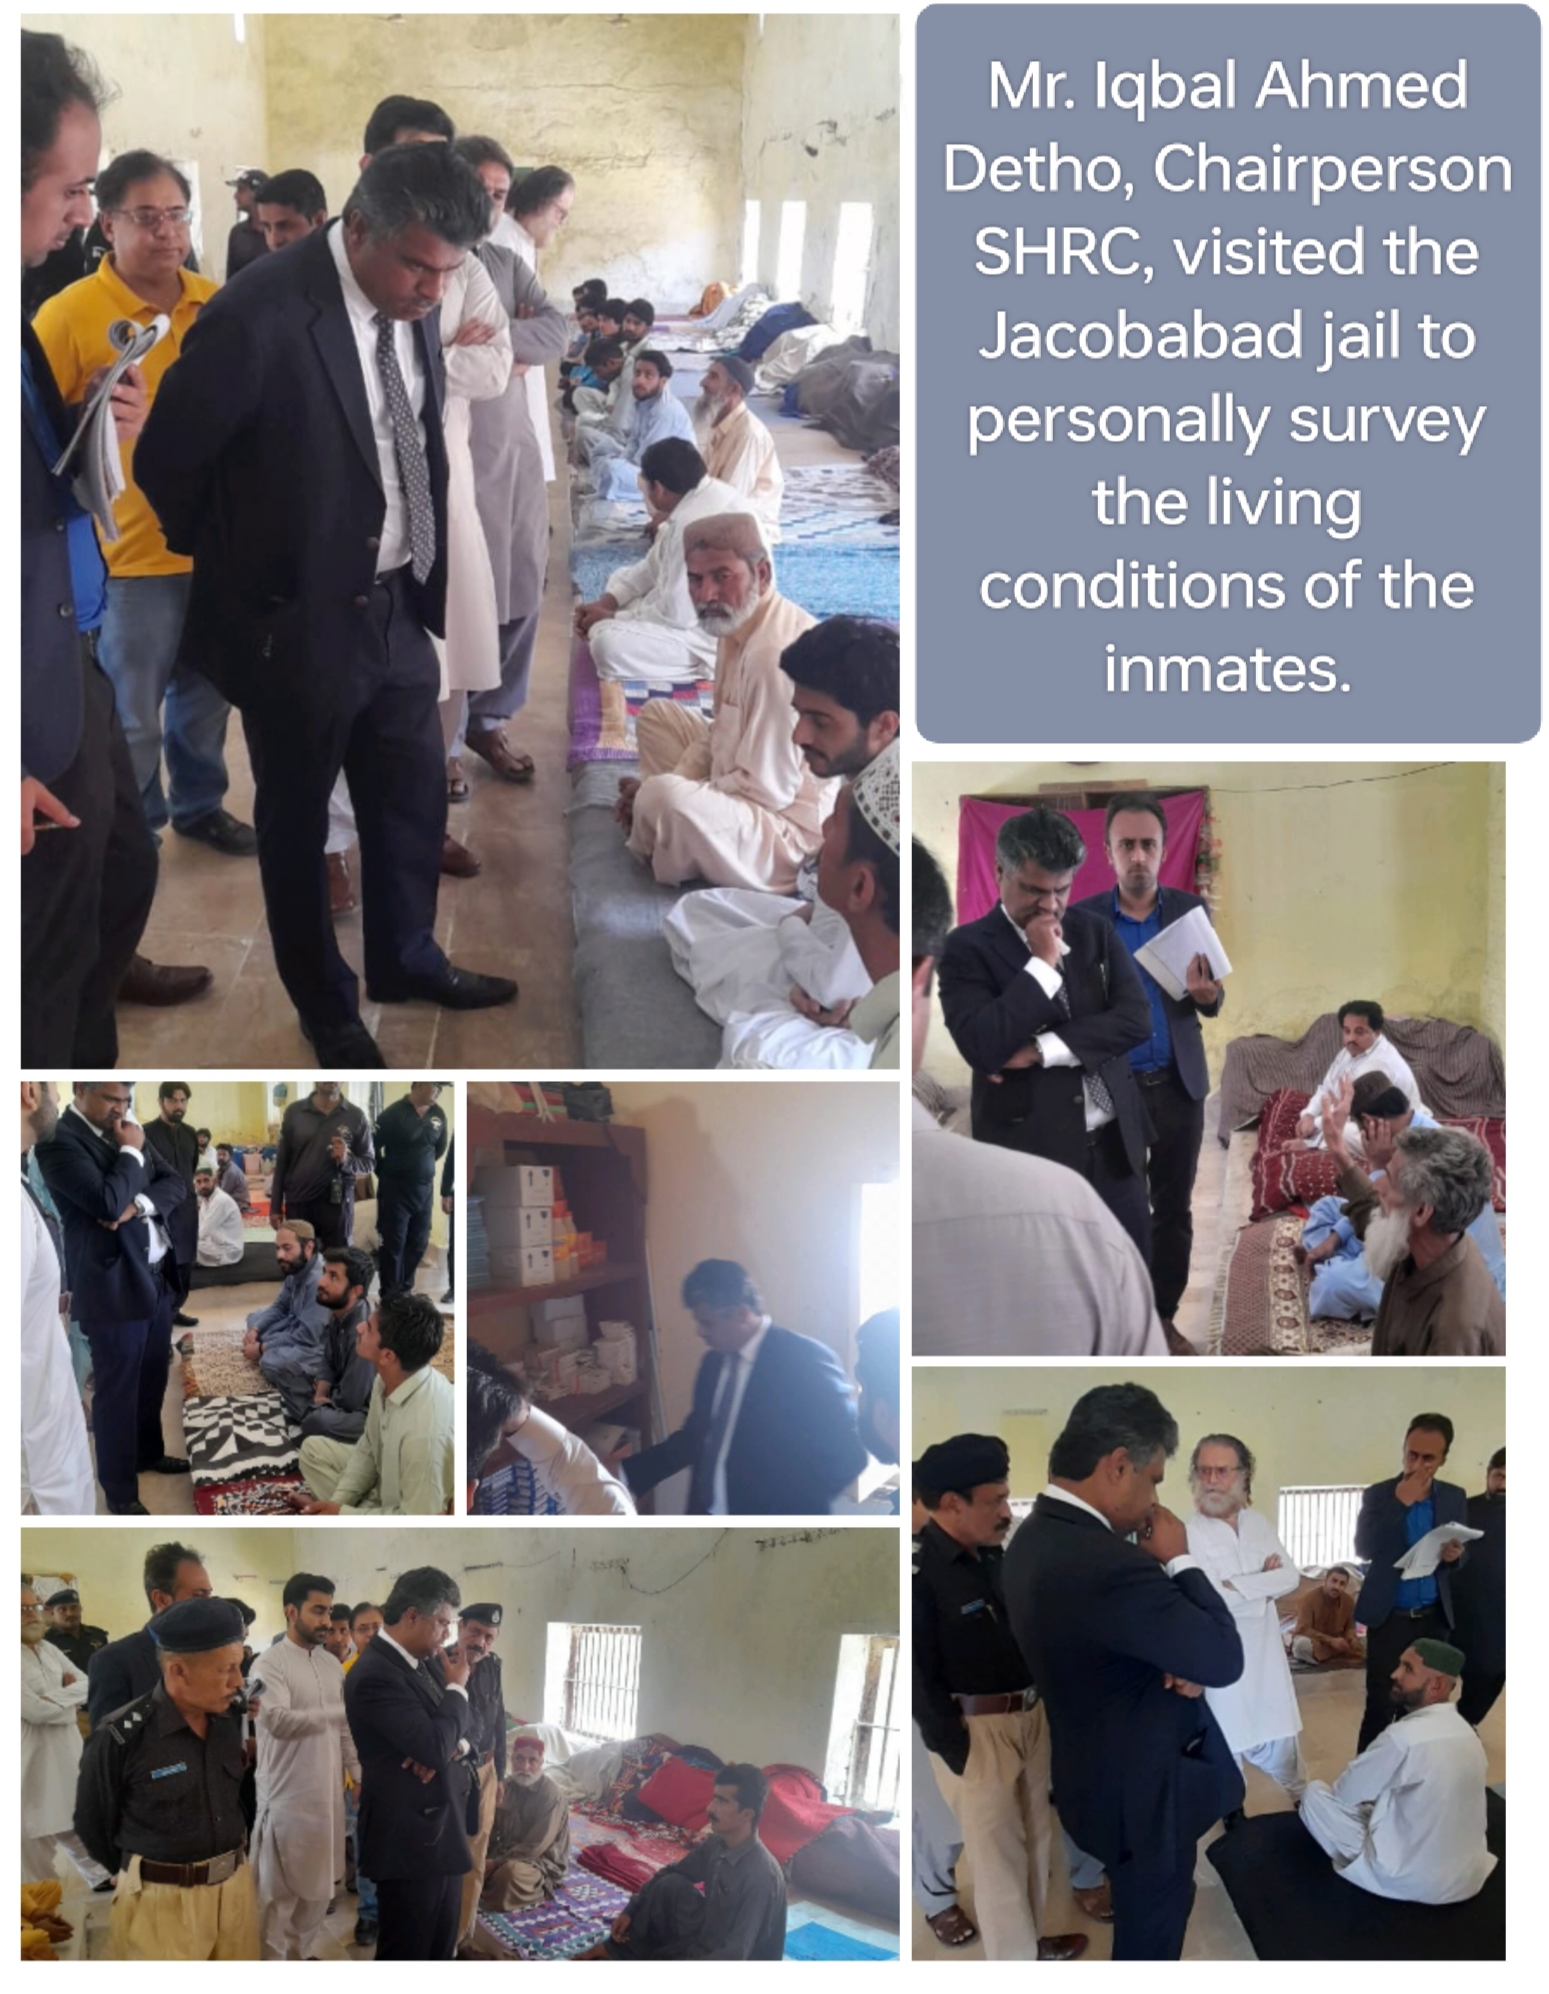 Mr. Iqbal Ahmed Detho, Chairperson SHRC visited the Jacobabad jail to personally survey the living conditions of the inmates.